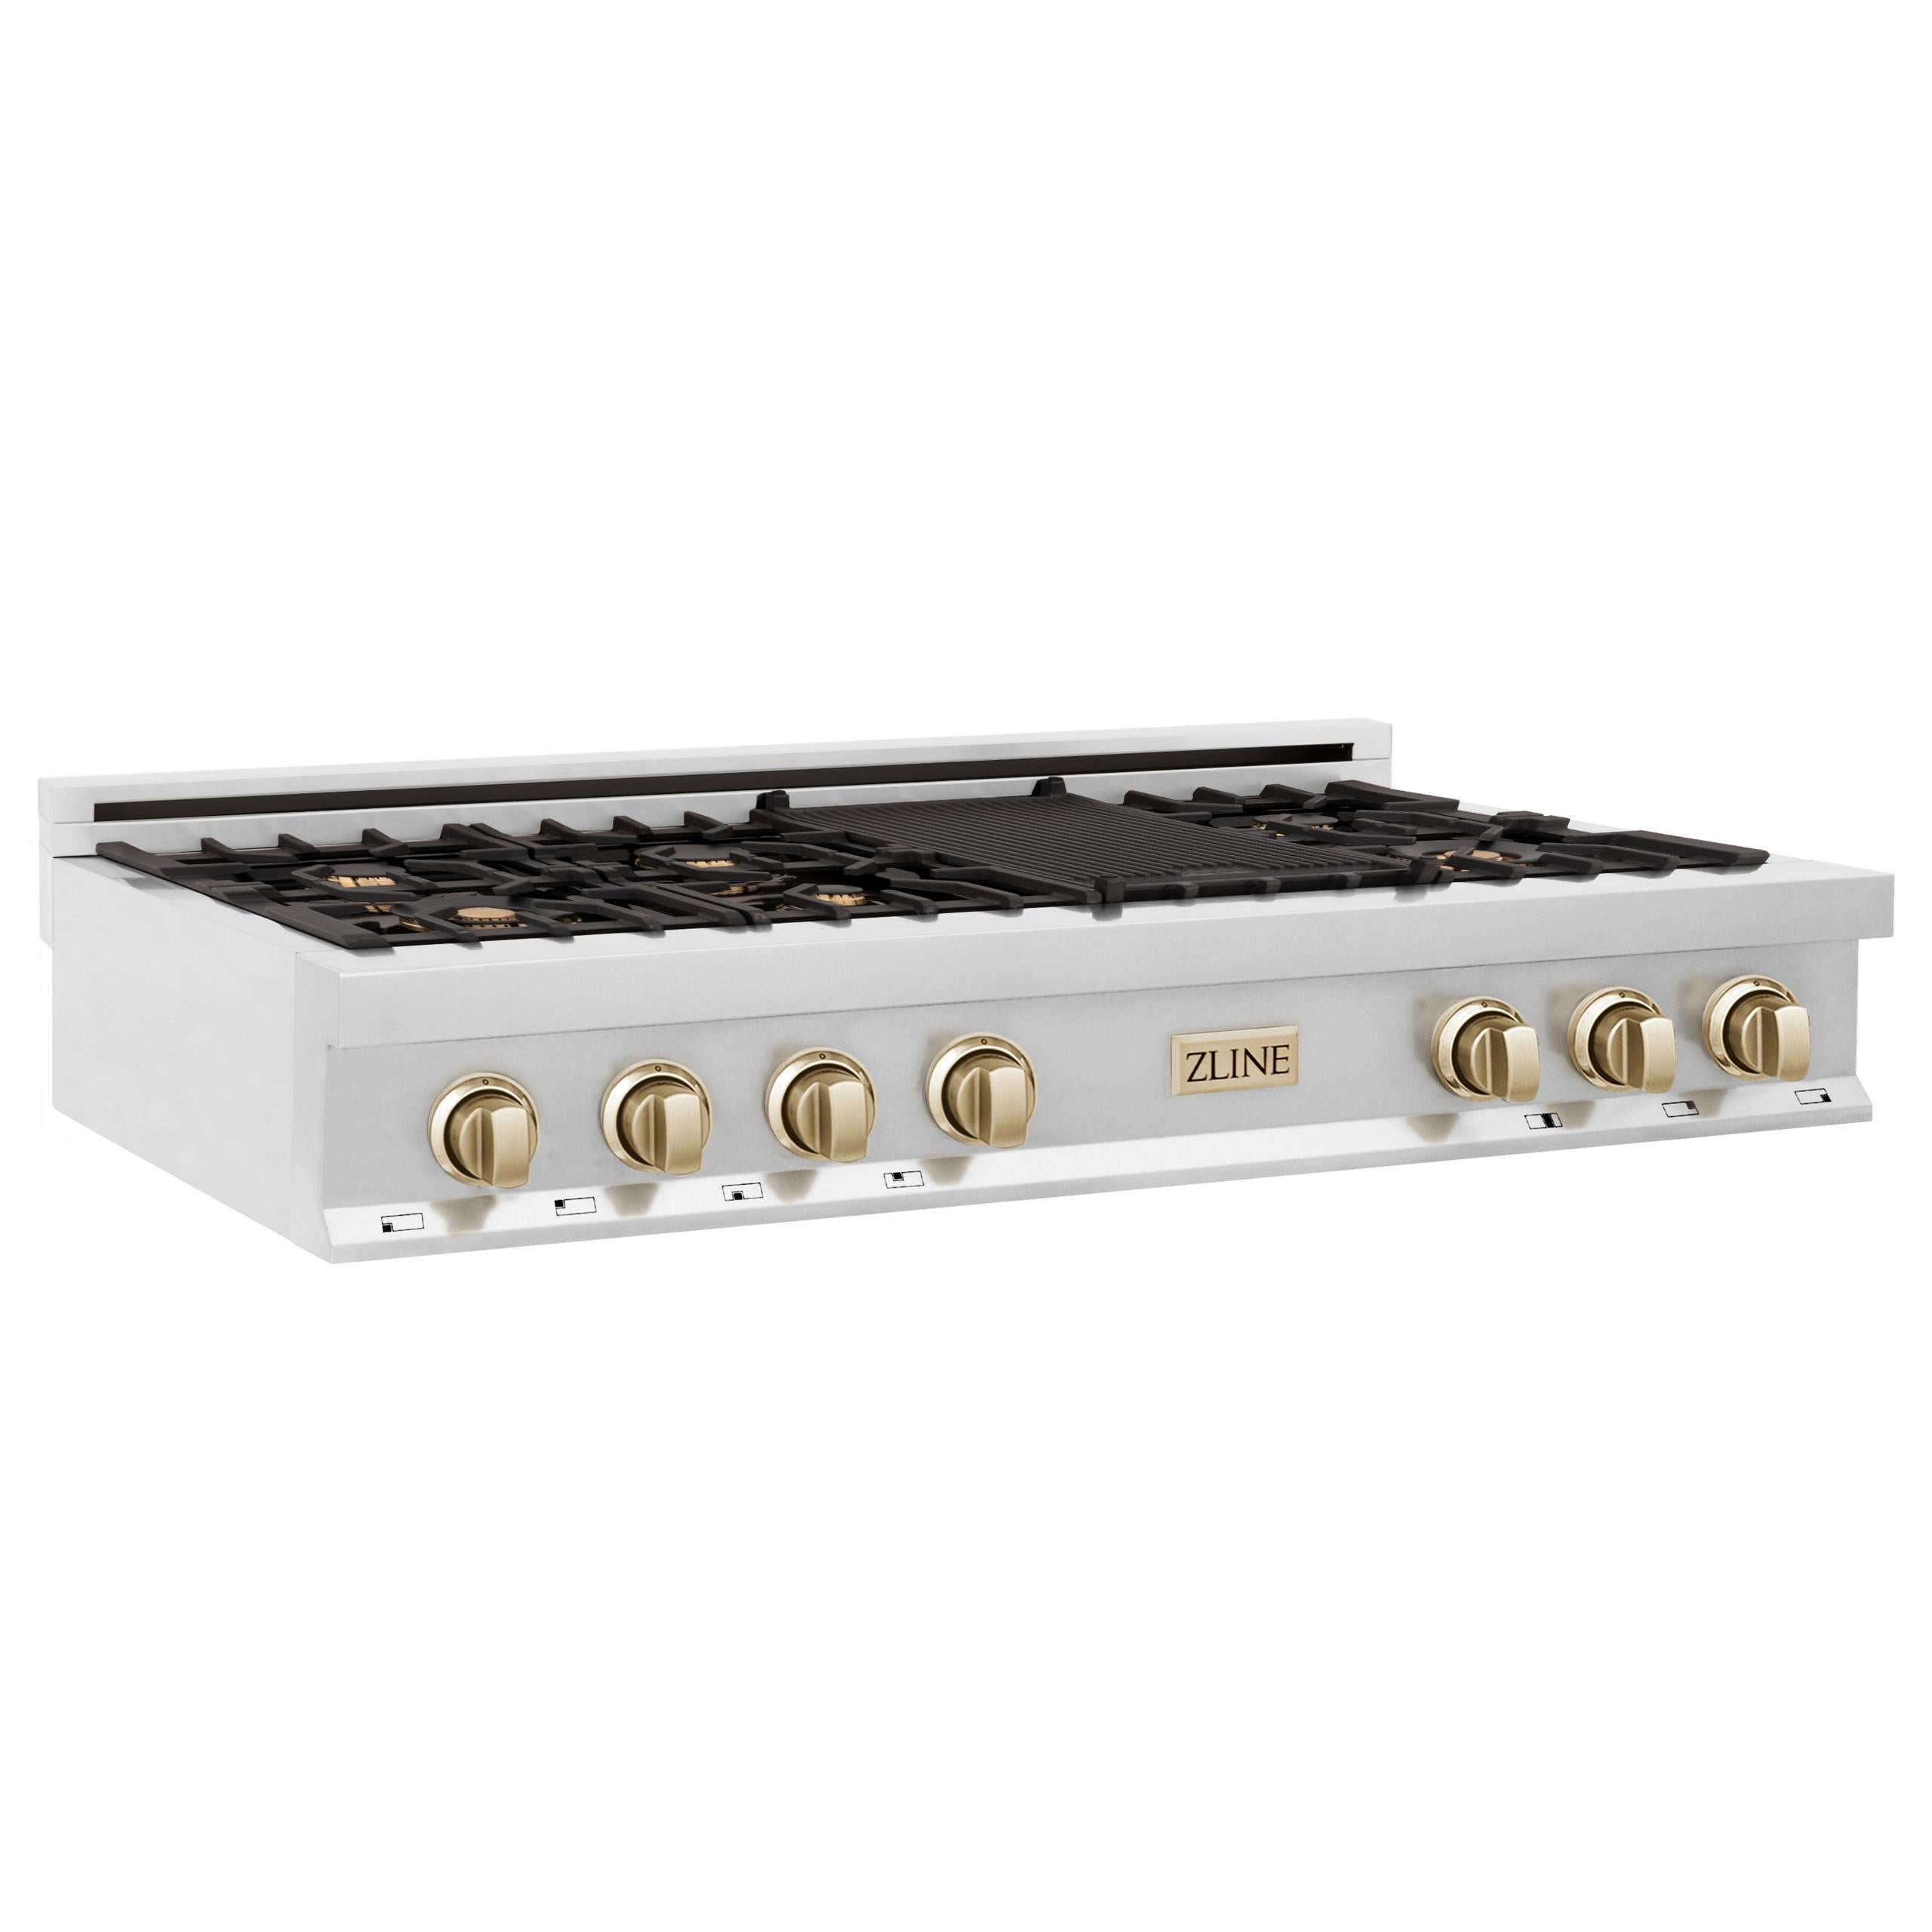 ZLINE KITCHEN AND BATH RTZ48CB ZLINE Autograph Edition 48" Porcelain Rangetop with 7 Gas Burners in Stainless Steel with Accents Color: Champagne Bronze